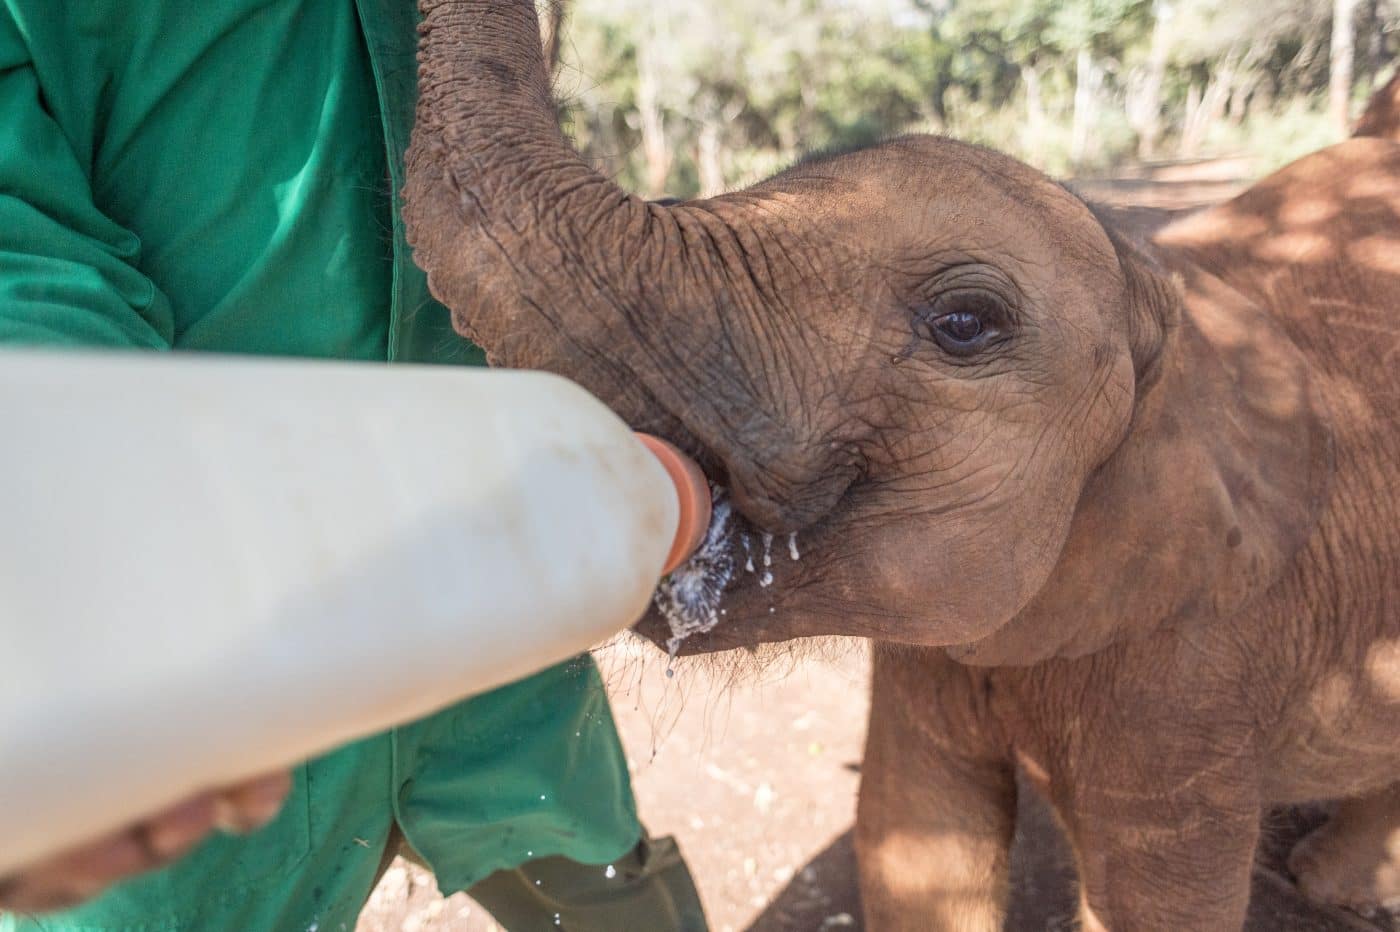 Image: baby elephant drinking from a bottle